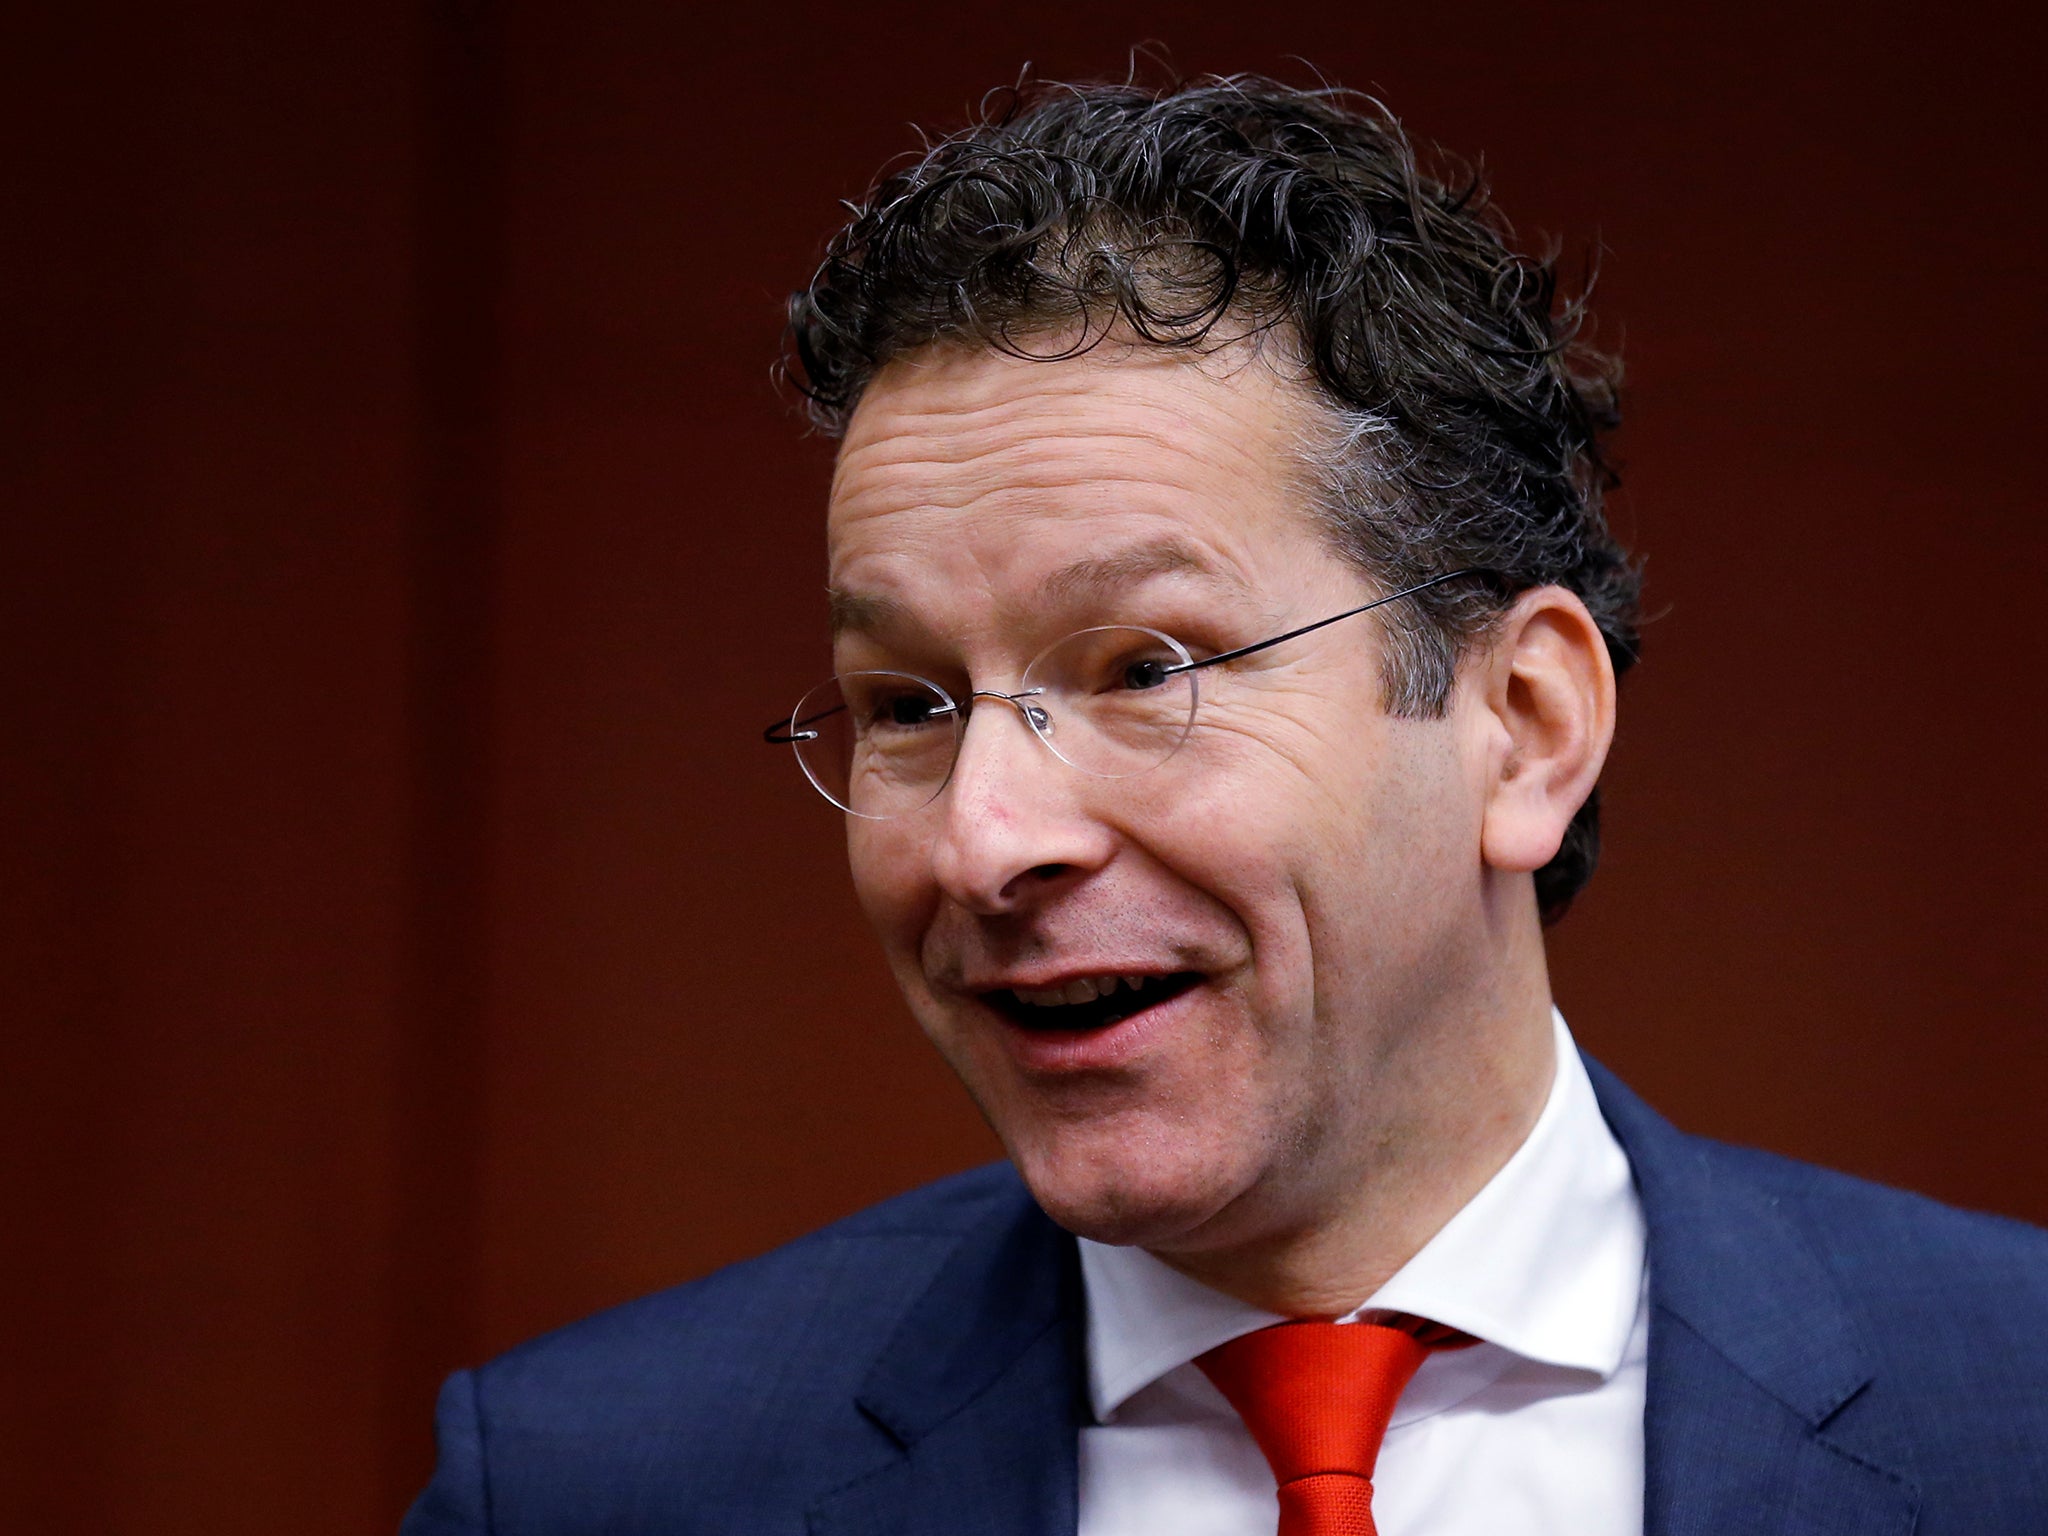 Eurogroup Head Pressured To Quit After Sexist Racist Remarks About